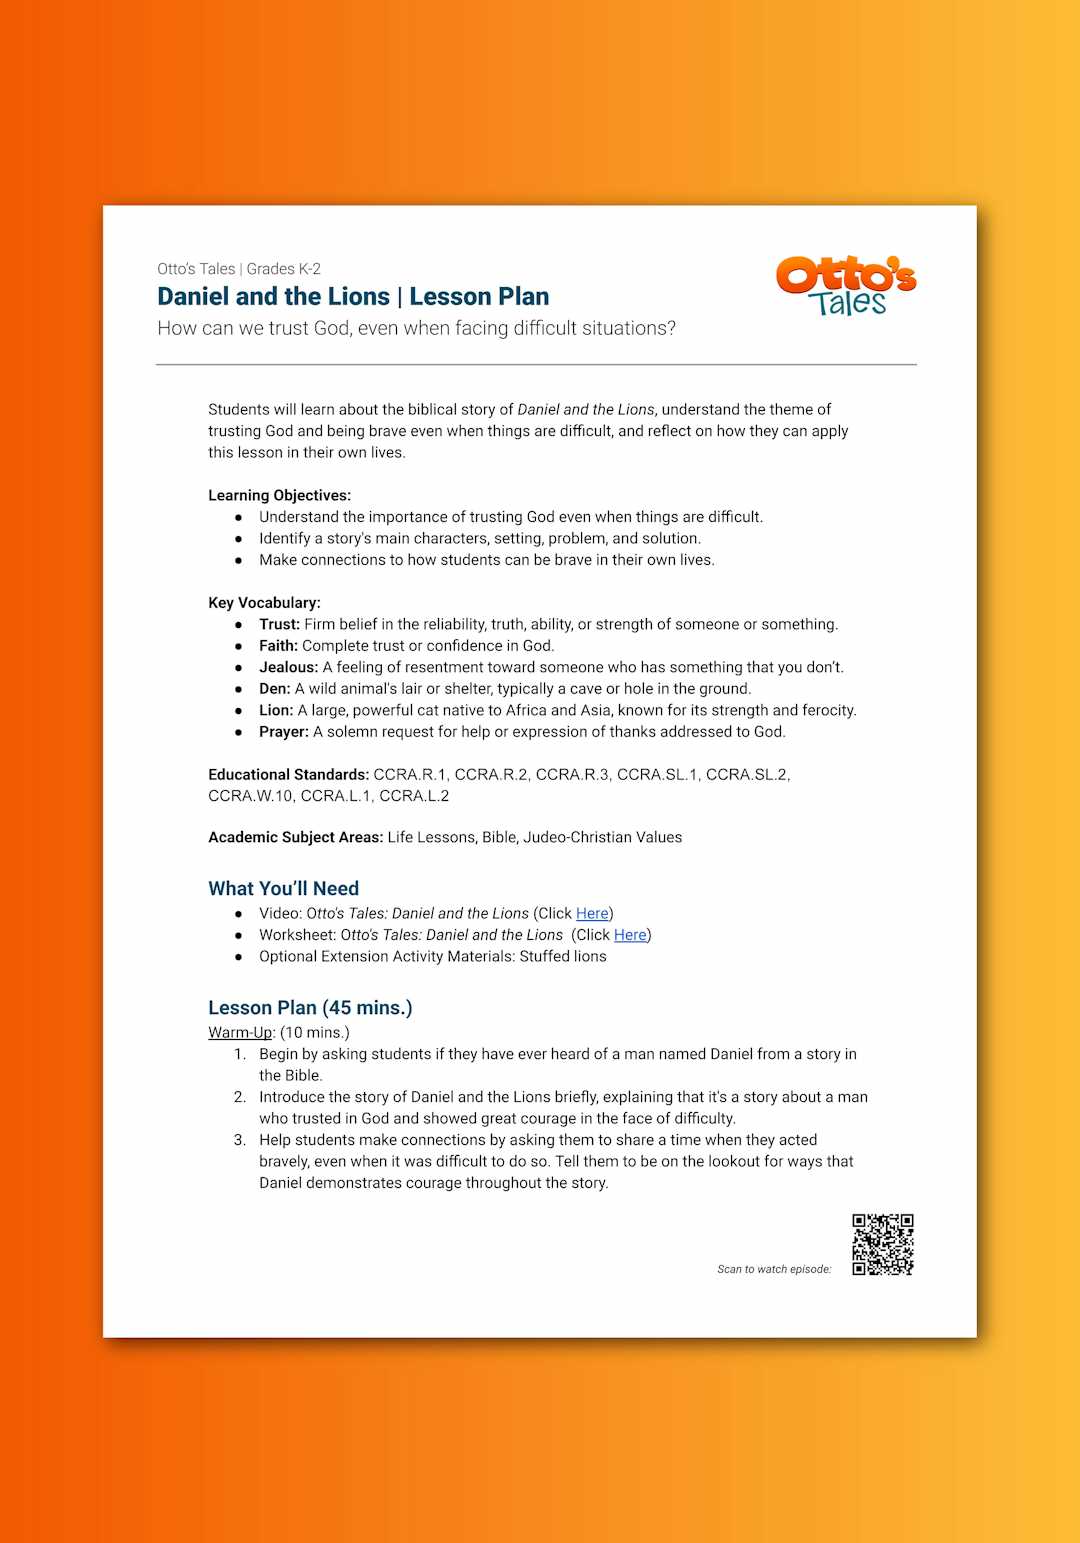 "Otto's Tales: Daniel and the Lions" Lesson Plan